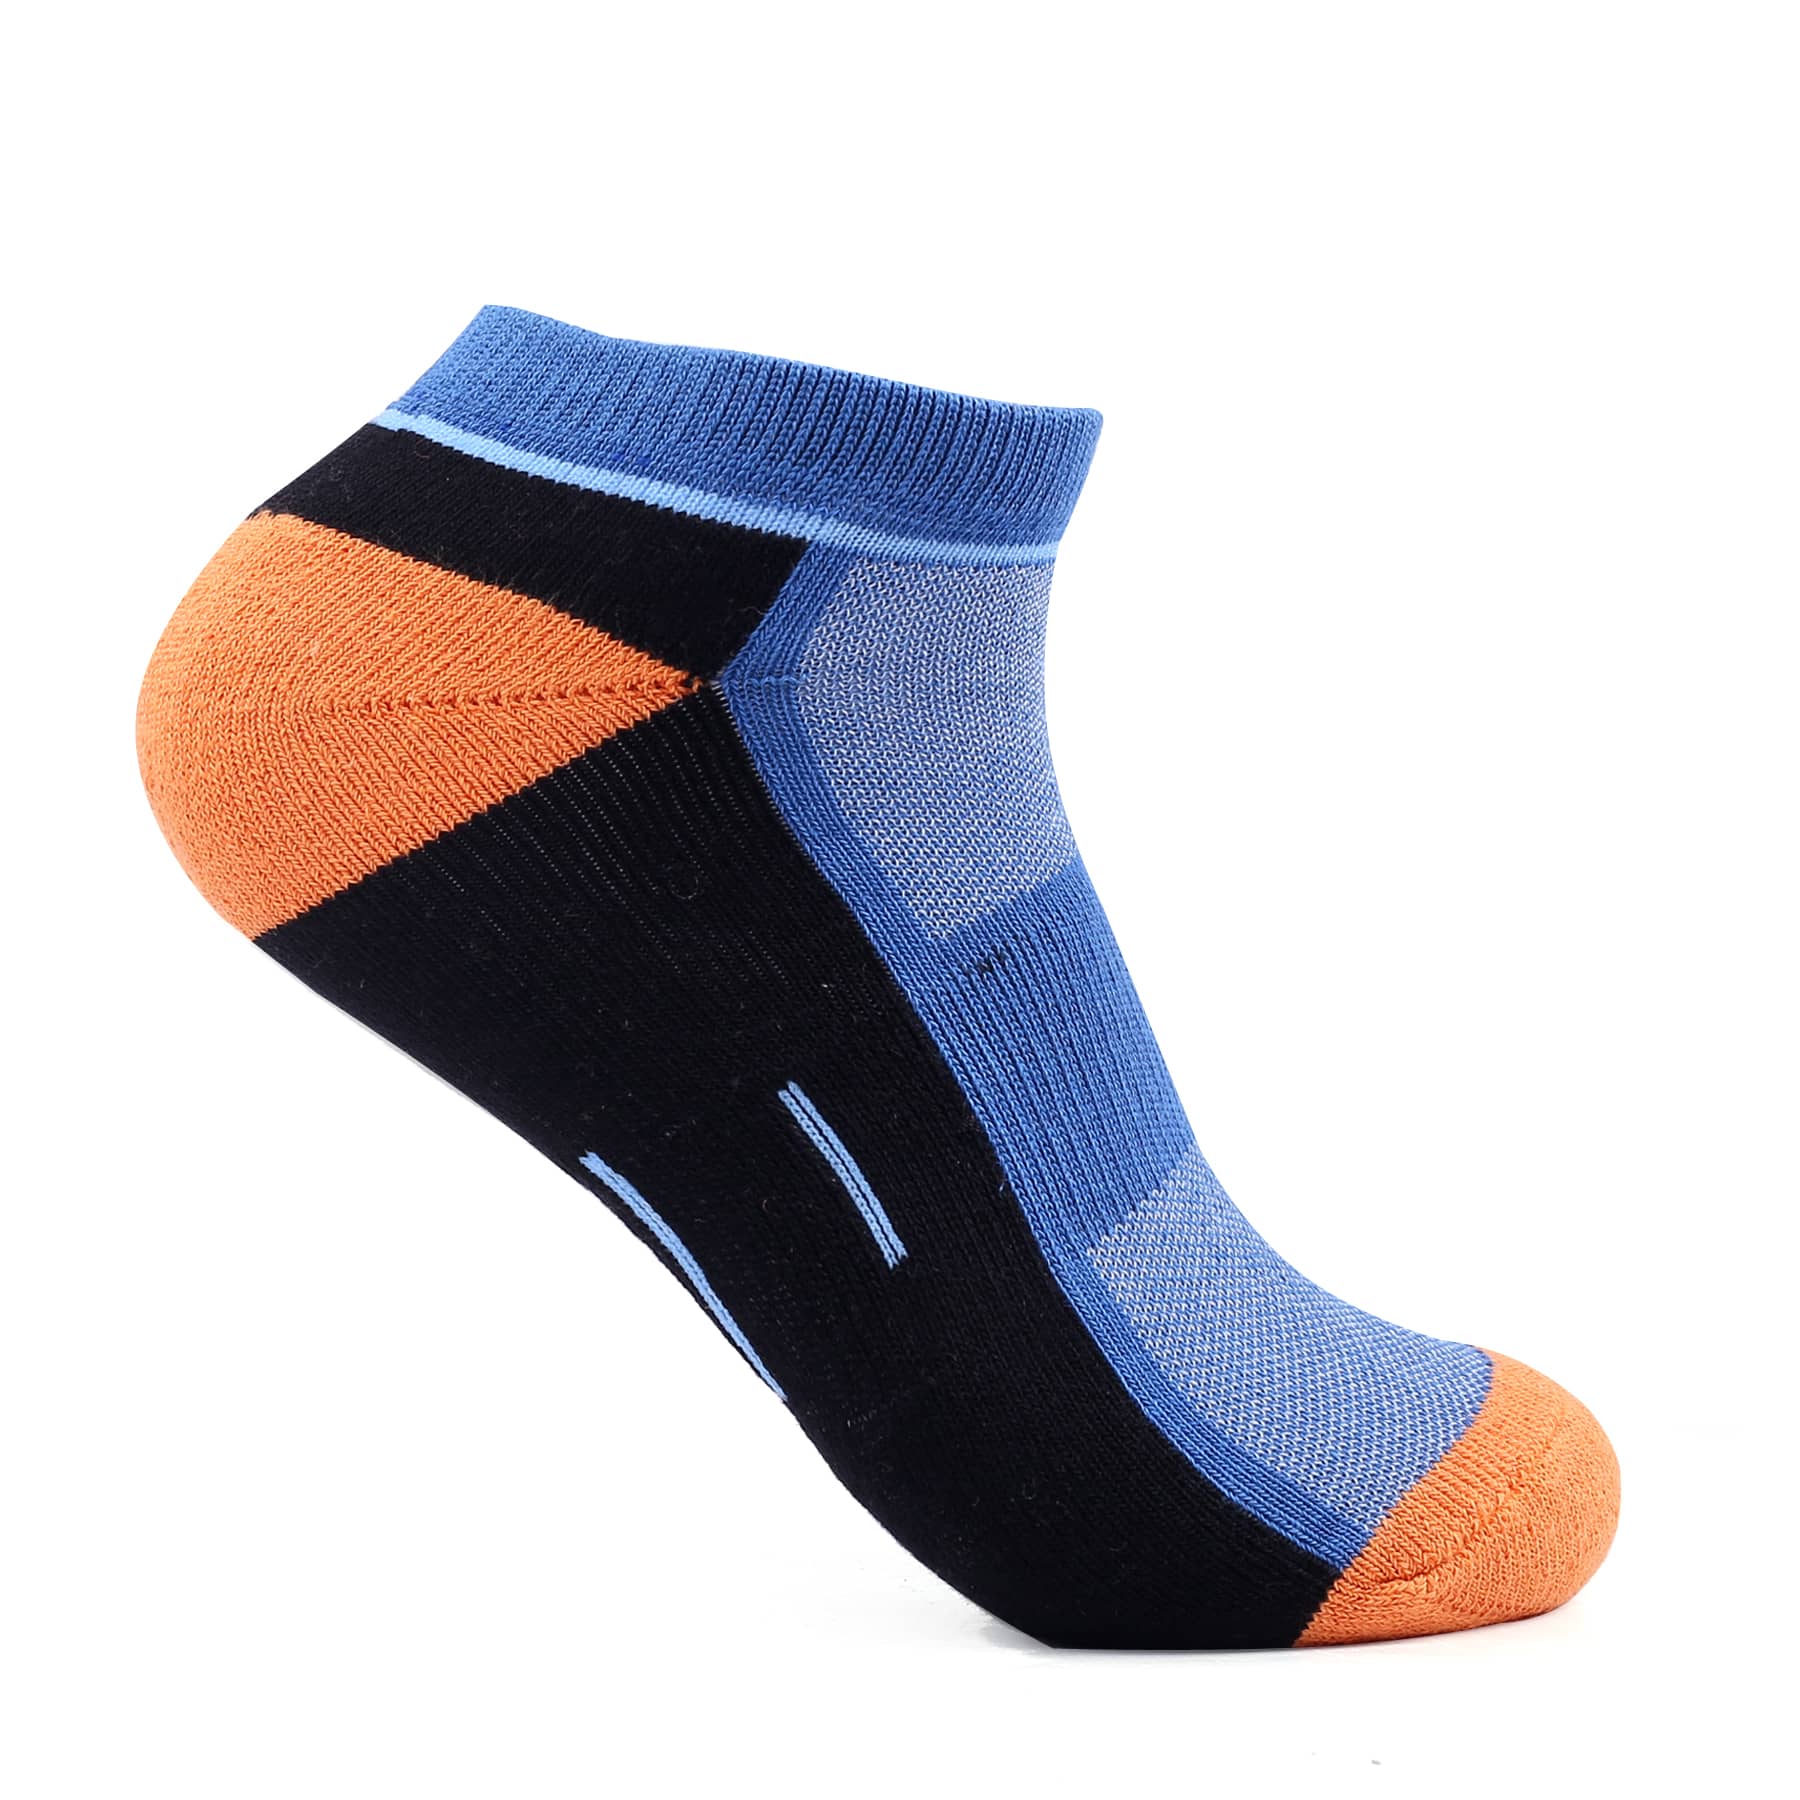 Bacca Bucci Short Ankle Length comfort performance Terry Athletic Running Socks for Men (1 Pair)